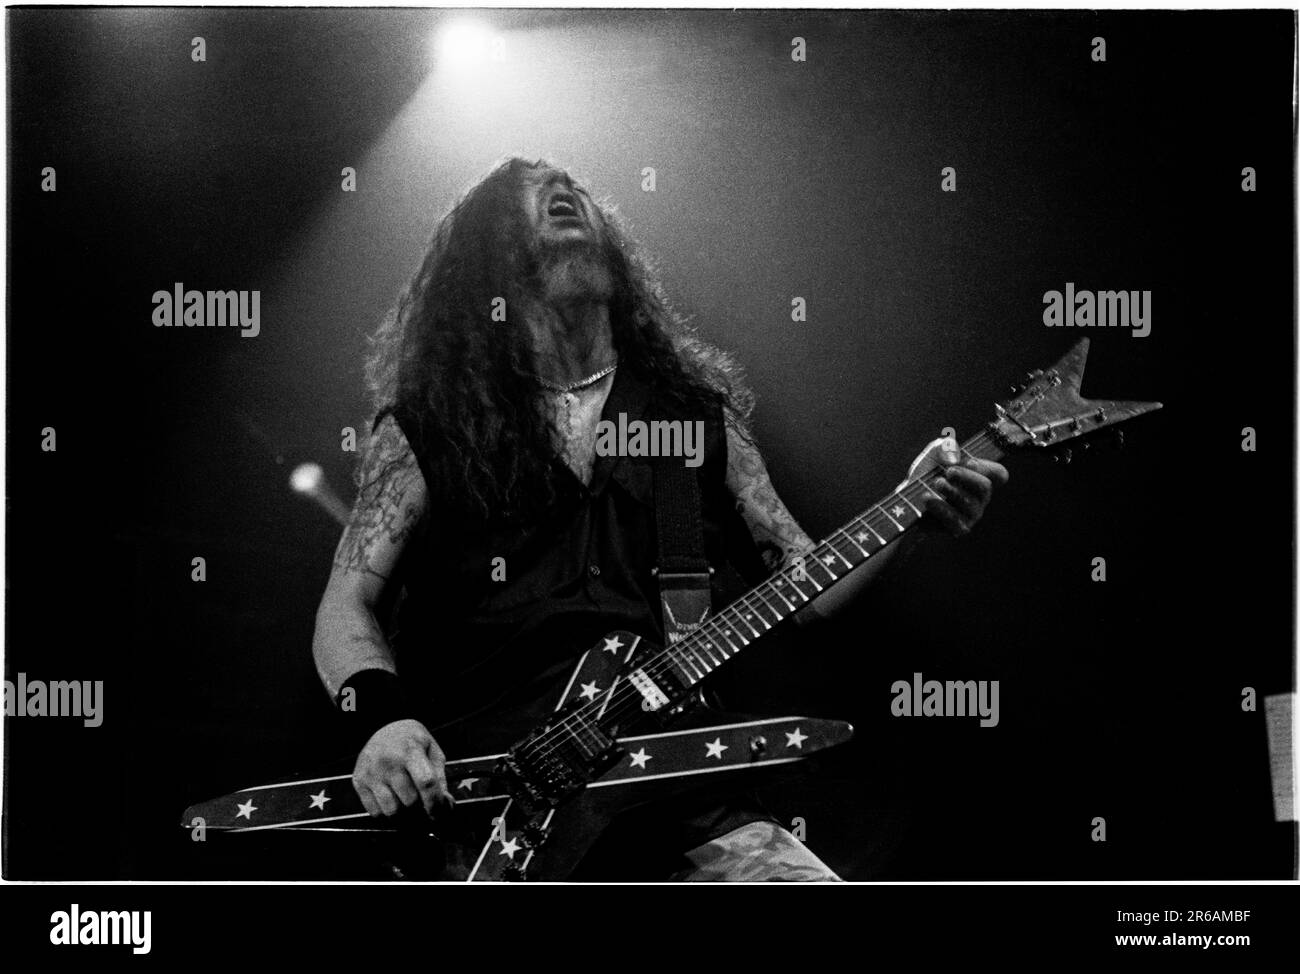 DIMEBAG DARRELL, PANTERA, 2000: Dimebag Darrell (1966-2004) guitarist with Pantera playing live on one of the last tours with the band's classic lineup at Newport Centre in Newport, Wales, UK on 24 April 2000. Photograph: Rob Watkins.  INFO: Dimebag Darrell, born Darrell Lance Abbott on August 20, 1966, in Arlington, Texas, was a revered guitarist known for his groundbreaking work with Pantera. Tragically, he was fatally shot onstage in 2004, leaving behind a legacy of influential metal music and devoted fans. Stock Photo